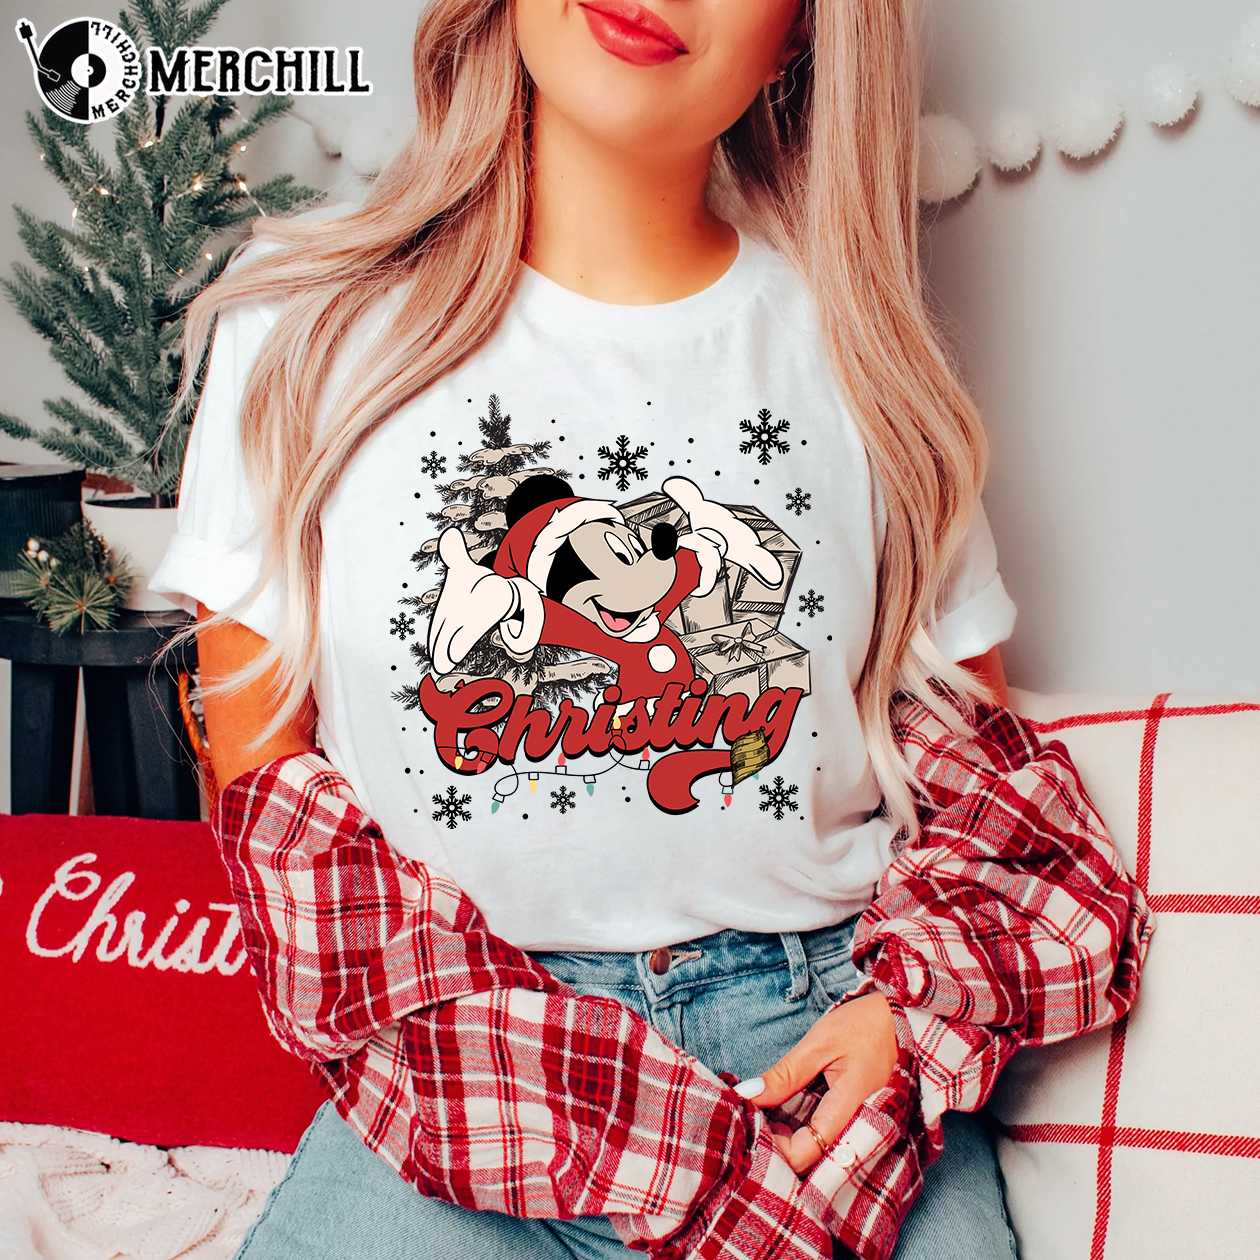 https://images.merchill.com/wp-content/uploads/2022/11/Vintage-Happy-Christening-Mickey-Mouse-Shirt-Mickey-Christmas-Shirt-Gifts-for-Disney-Lovers-3.jpg